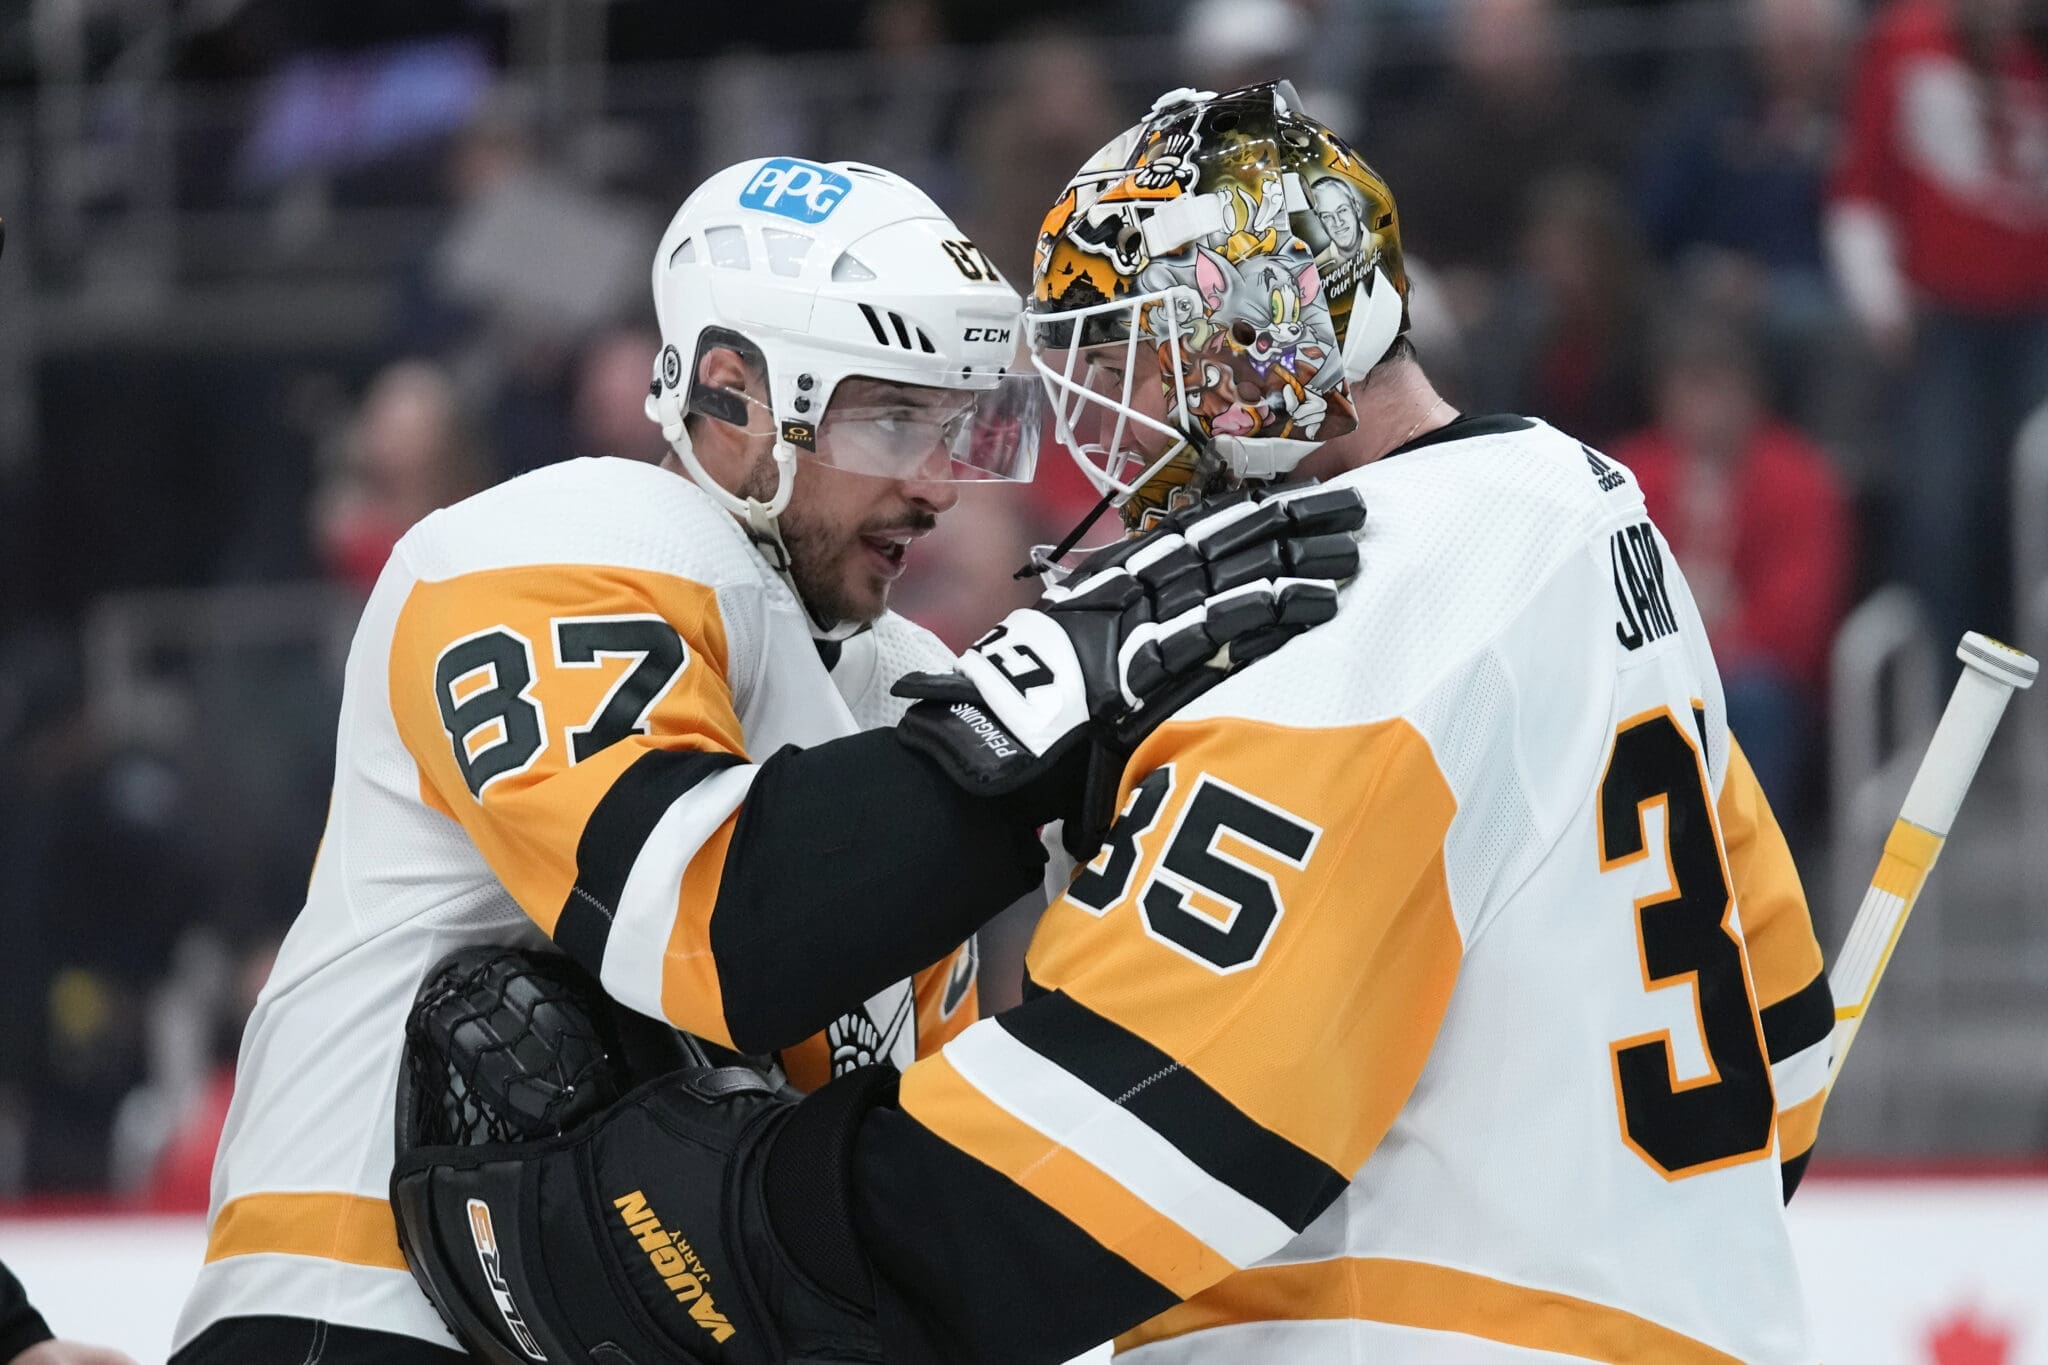 Penguins have become NHL's newest dynasty